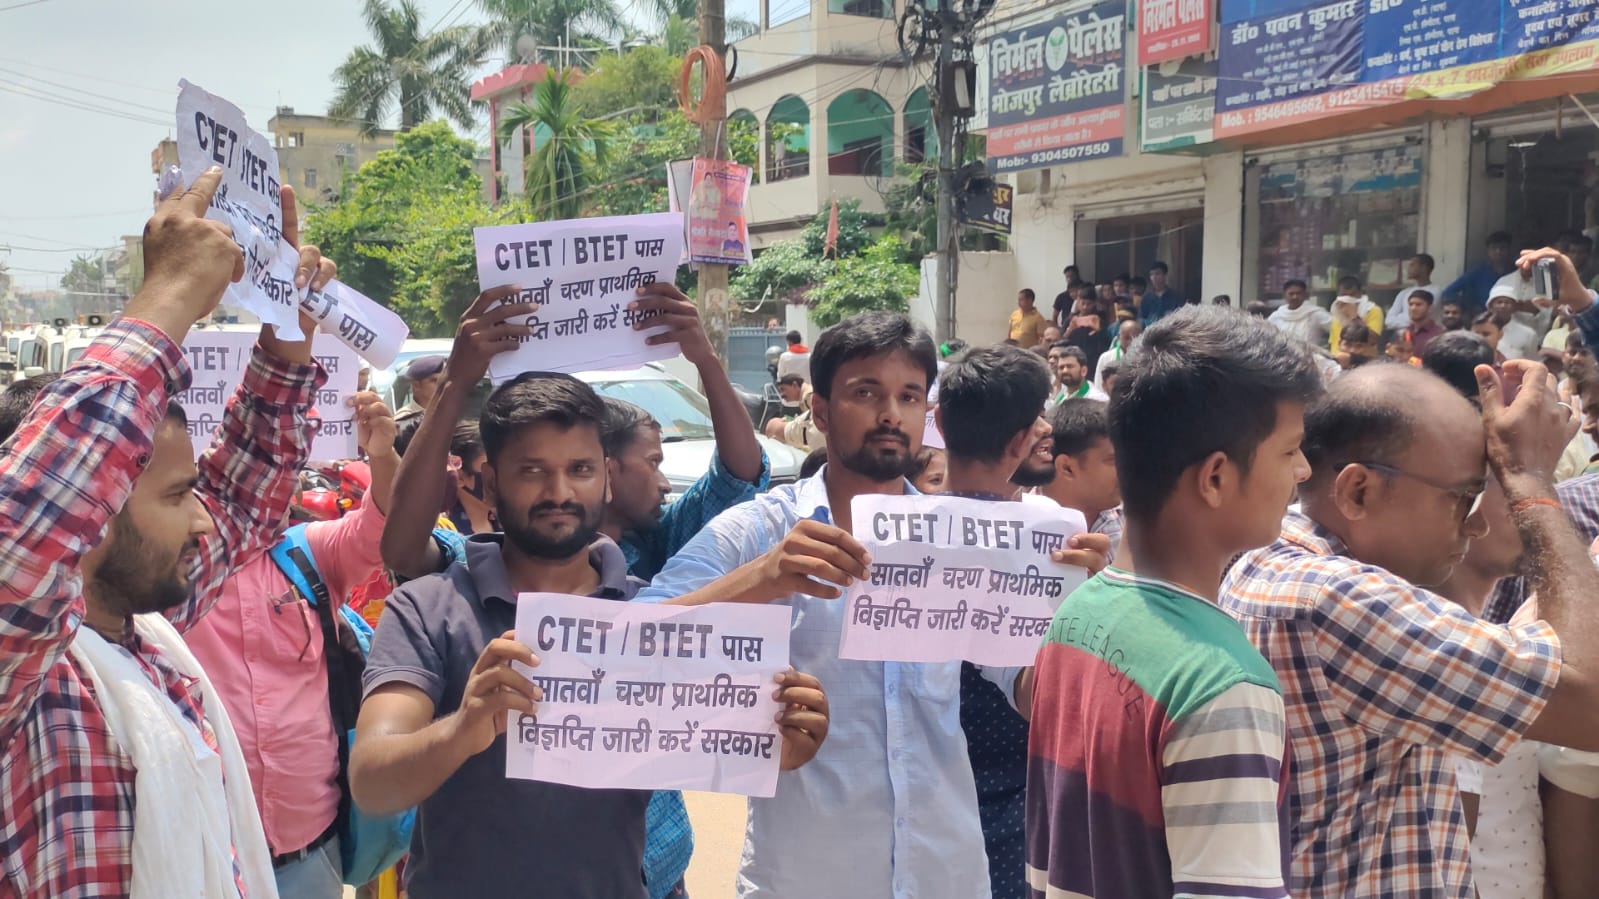 Protest of CTET candidates in front of Tejashwi